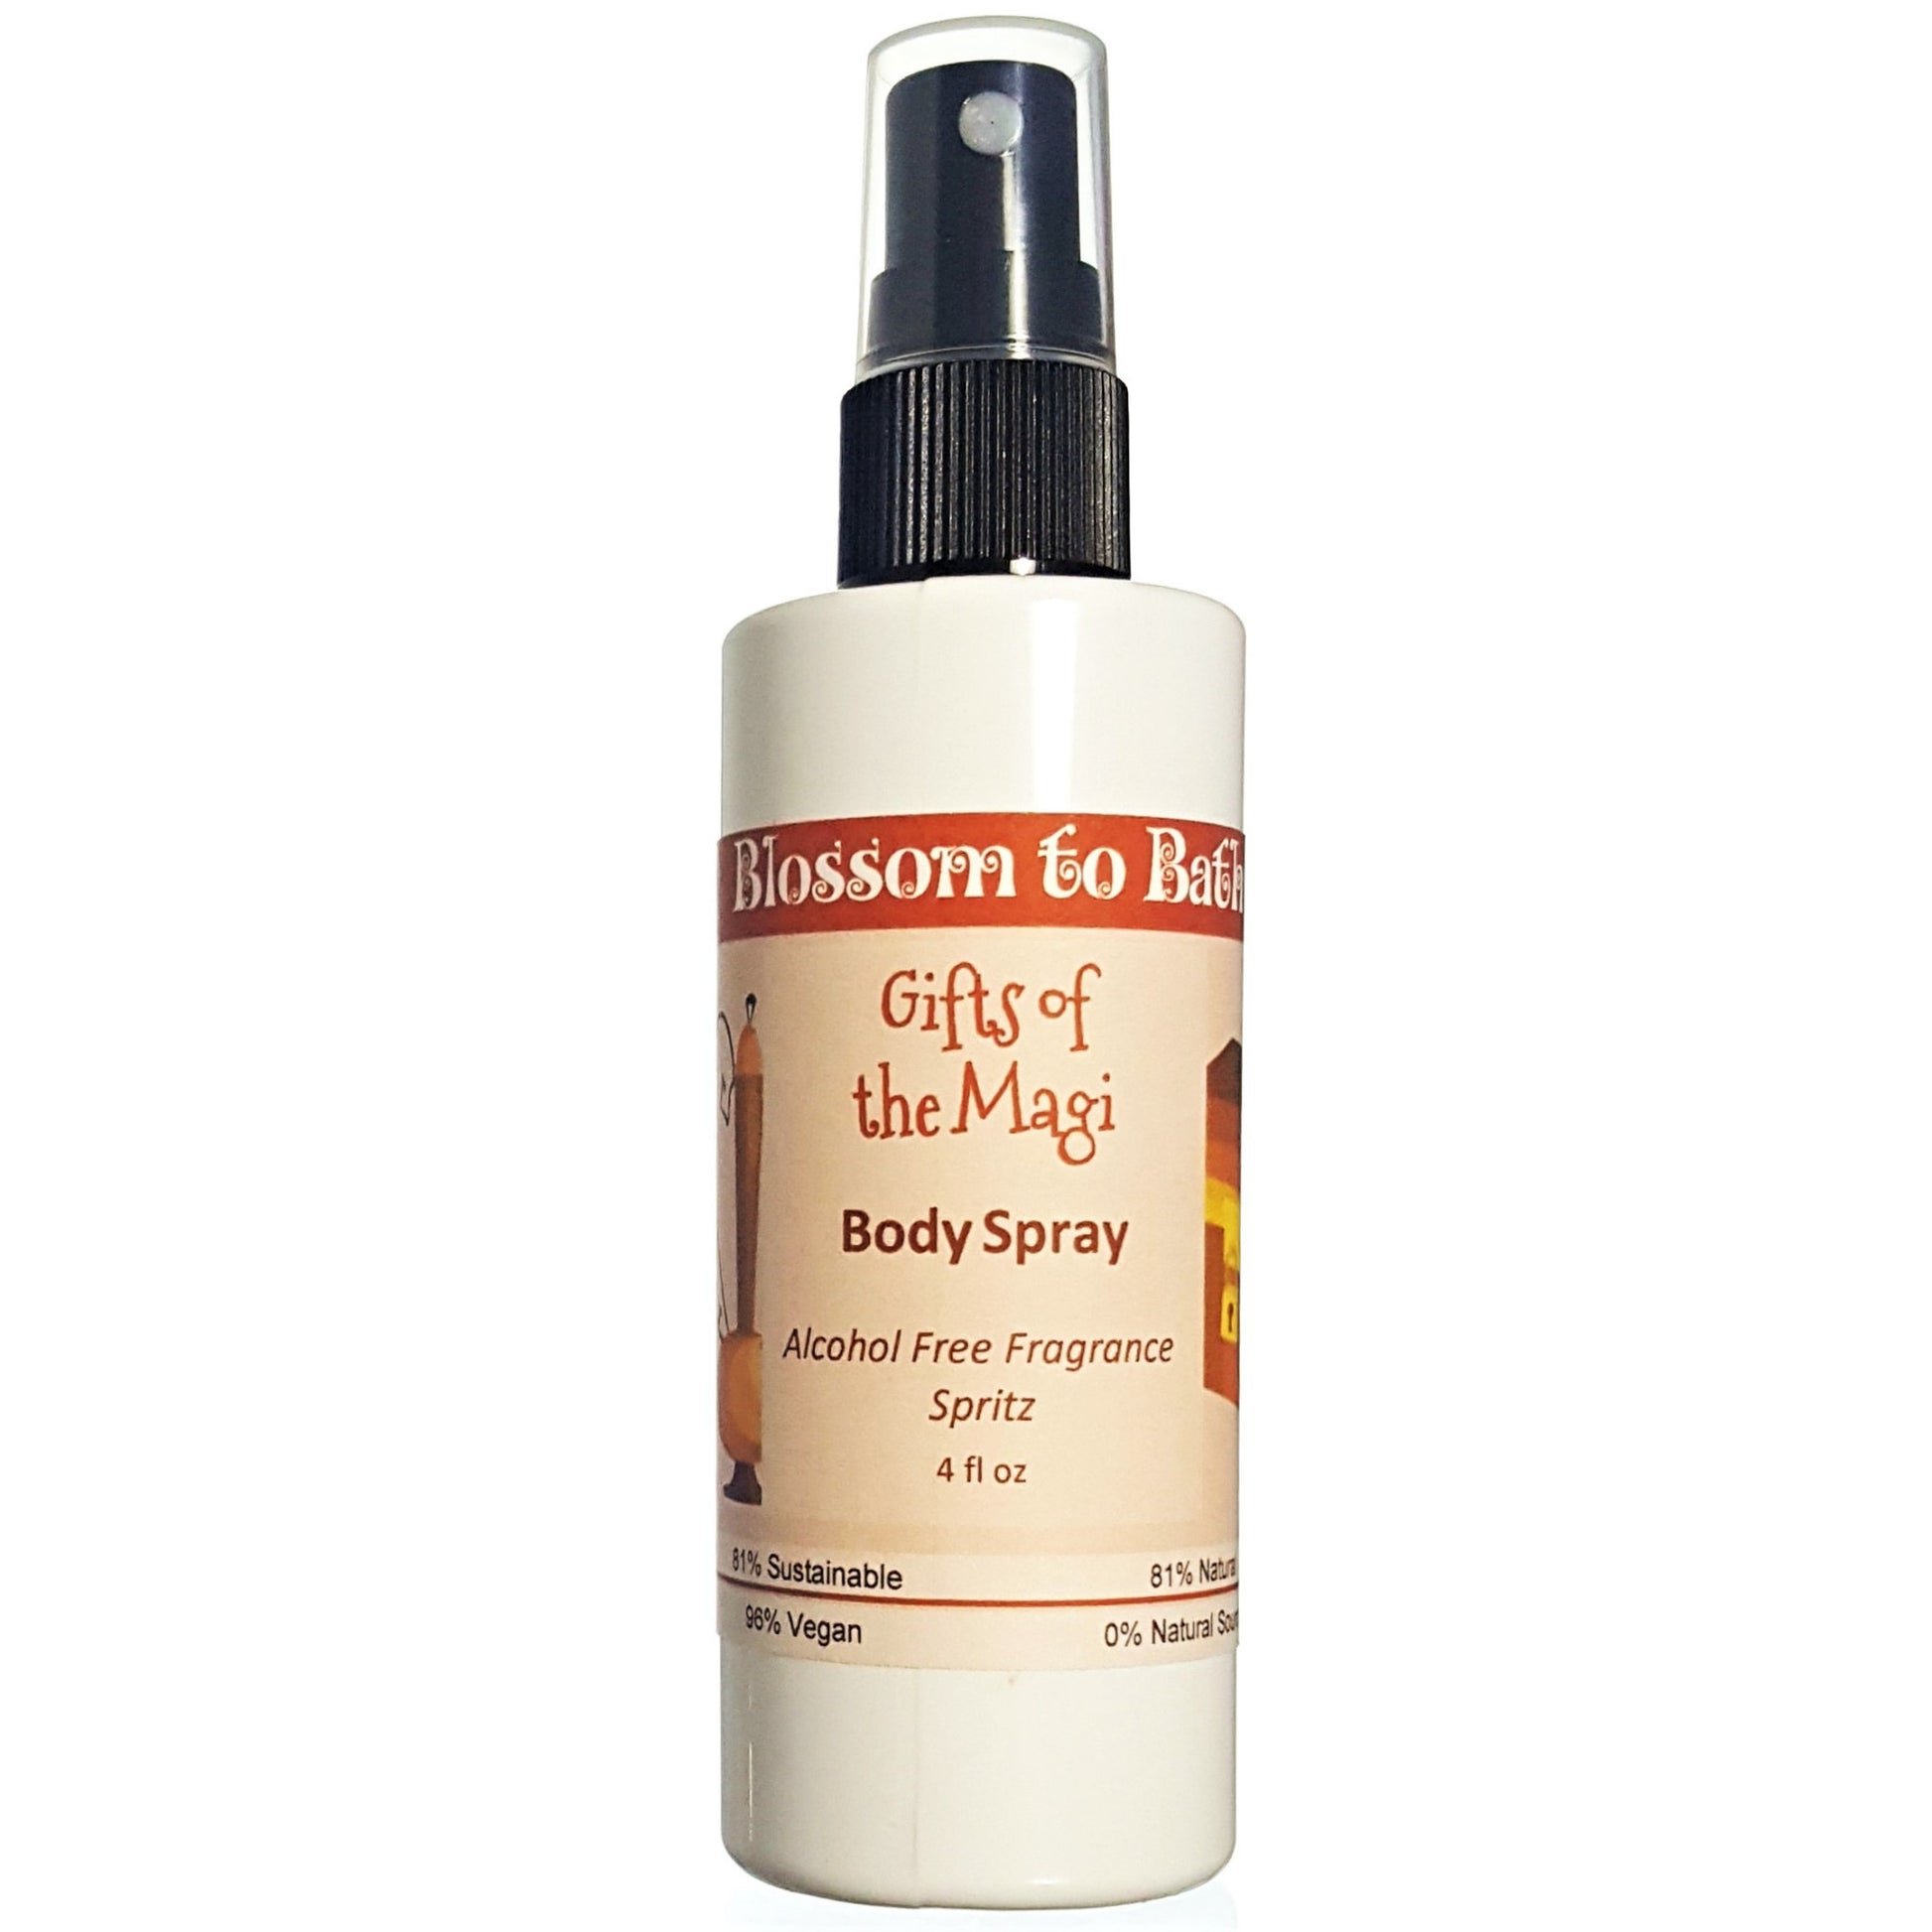 Buy Blossom to Bath Gifts of the Magi Body Spray from Flowersong Soap Studio.  Natural  freshening of skin, linens, or air  Celebrate the soulful side of the holiday spirit with warm spices and incense.